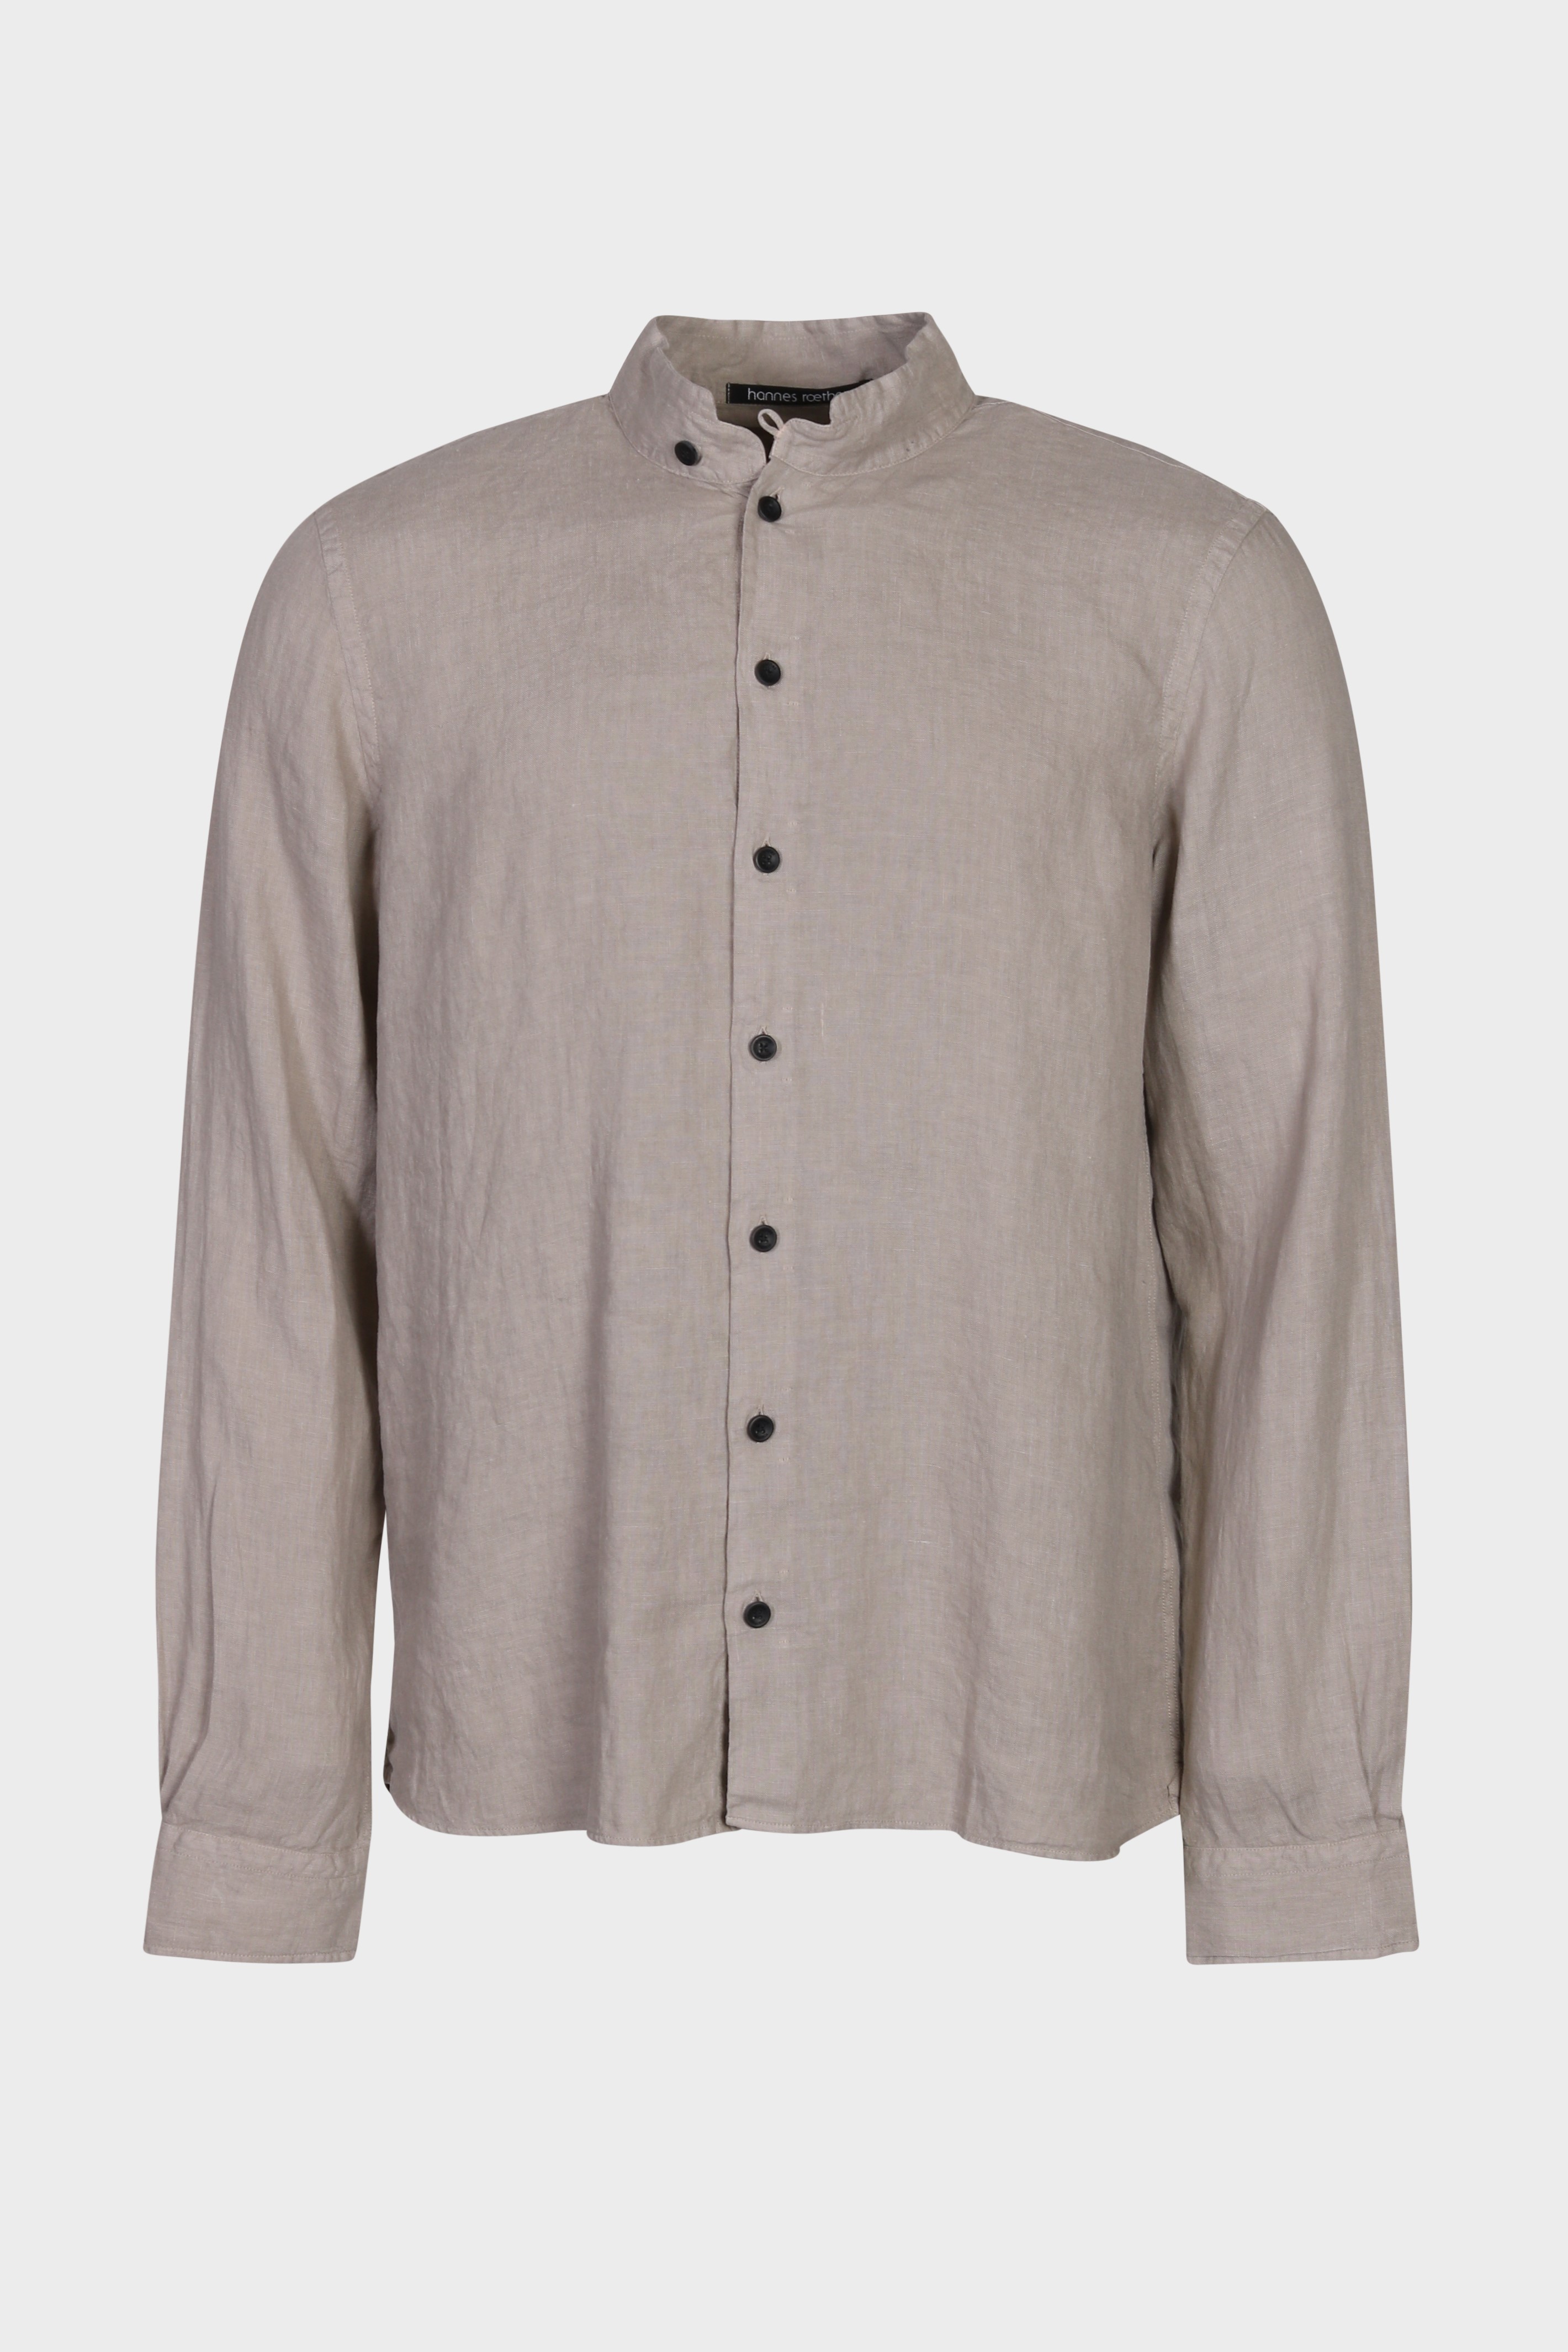 HANNES ROETHER Linen Shirt in Light Grey M